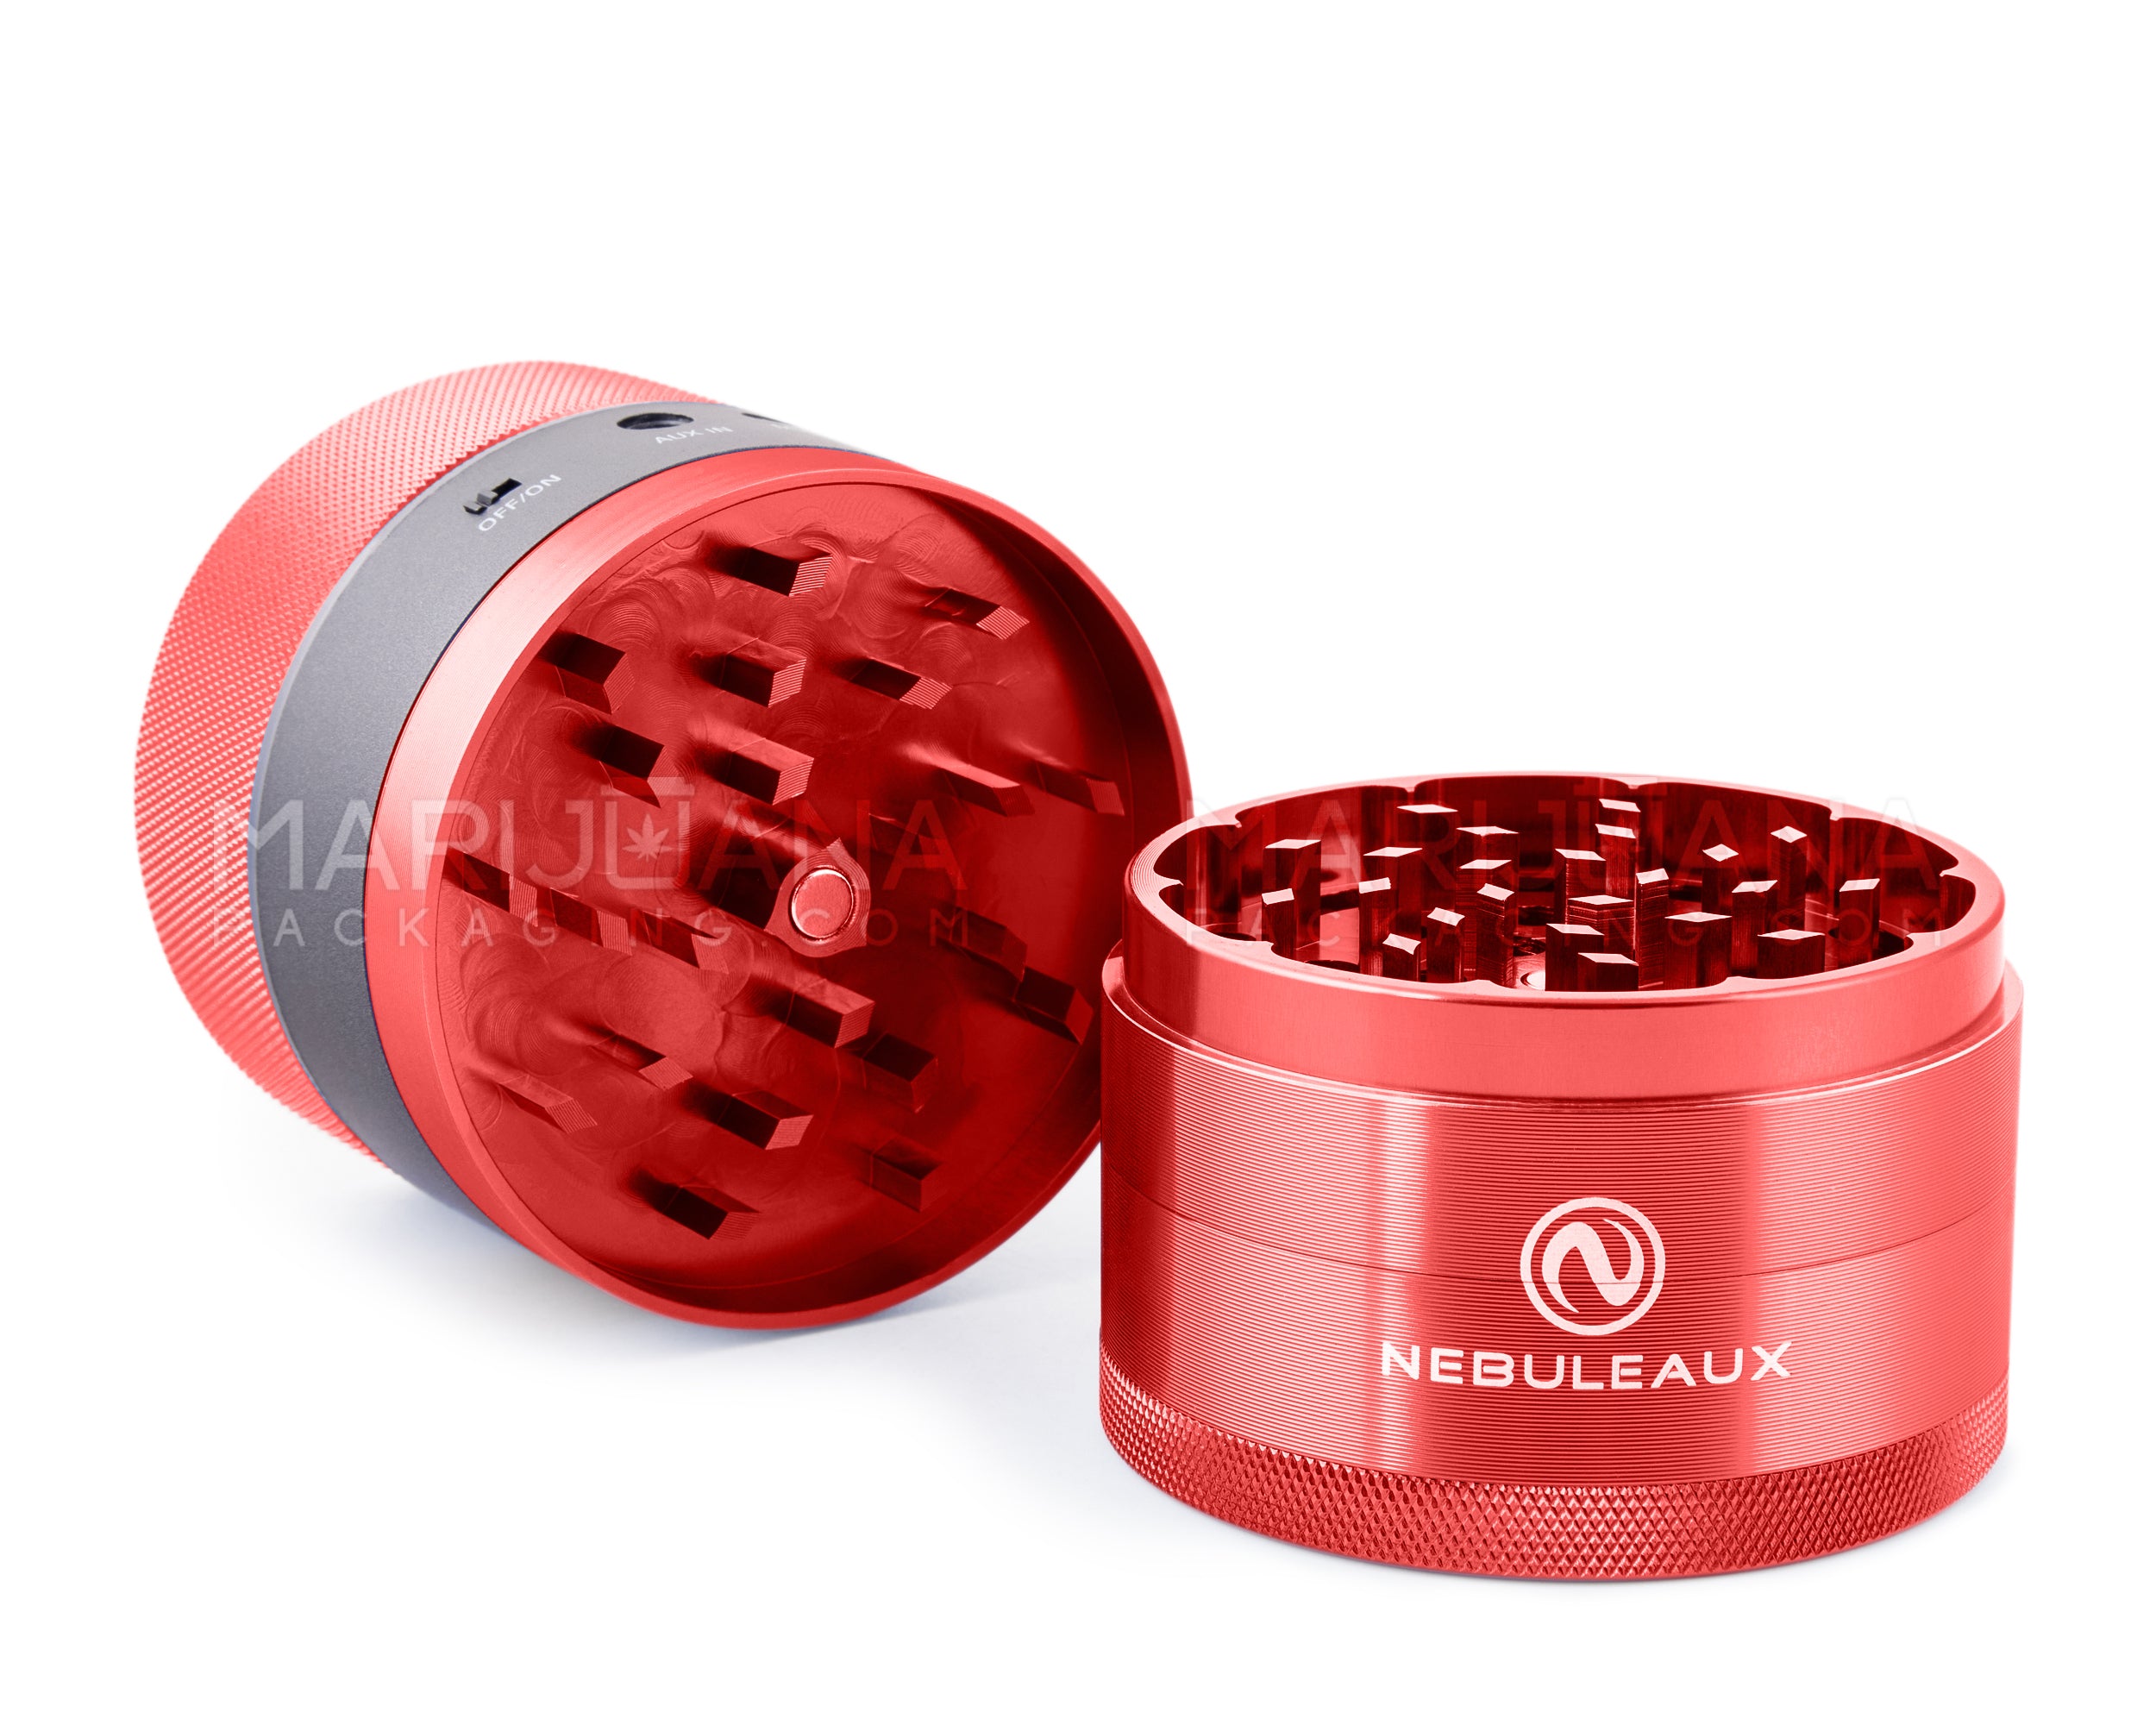 NEBULEAUX | LED Herb Grinder w/ Built-In Wireless Bluetooth Speakers | 4 Piece - 62mm - Red - 3